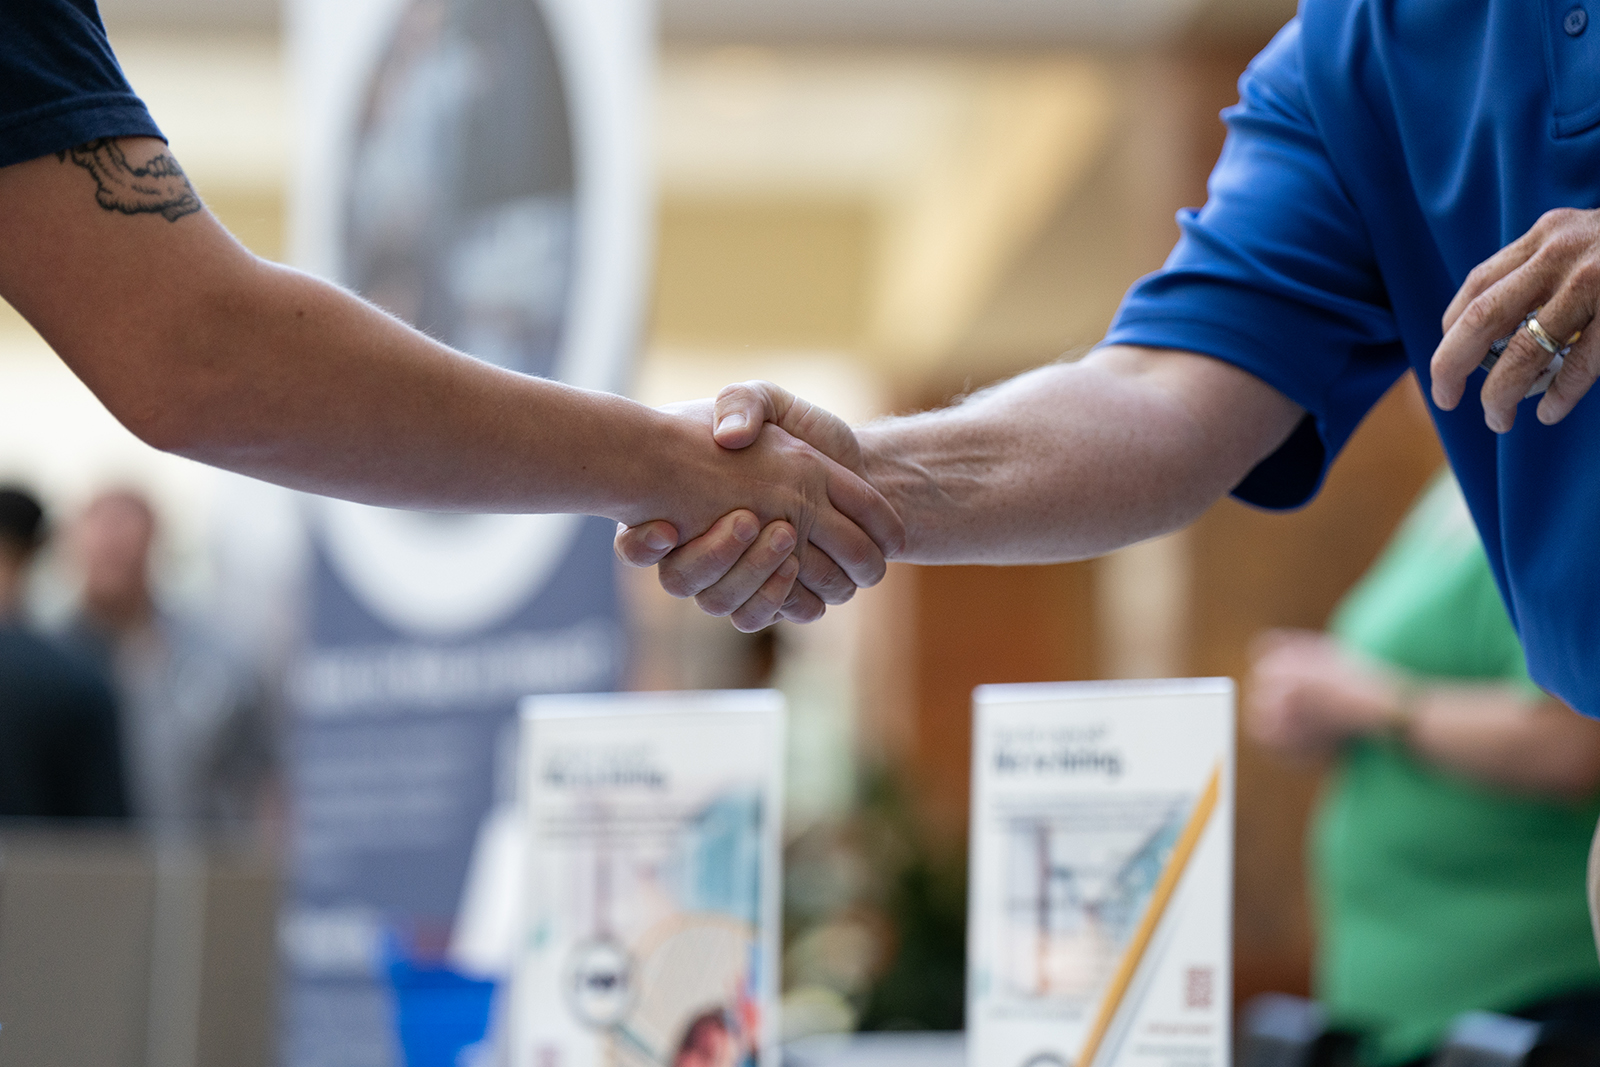 A jobseeker and recruiter shake hands at the Cape Fear Community College's Business and IT Career Fair at Cape Fear Community College North Building in Castle Hayne, North Carolina, on Sept. 20.